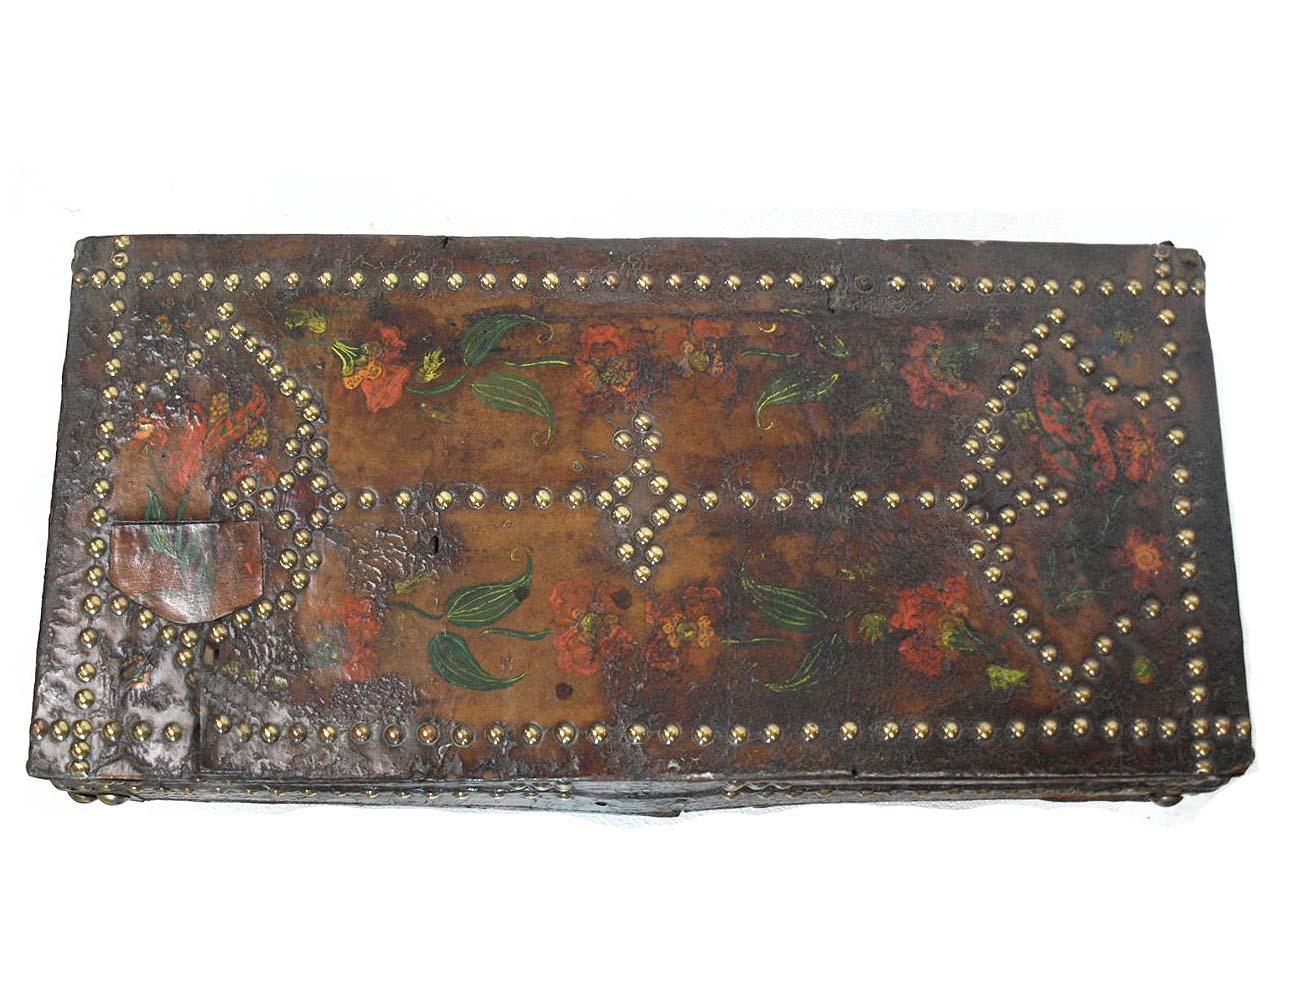 Steel Brass Studded Painted Leather Box